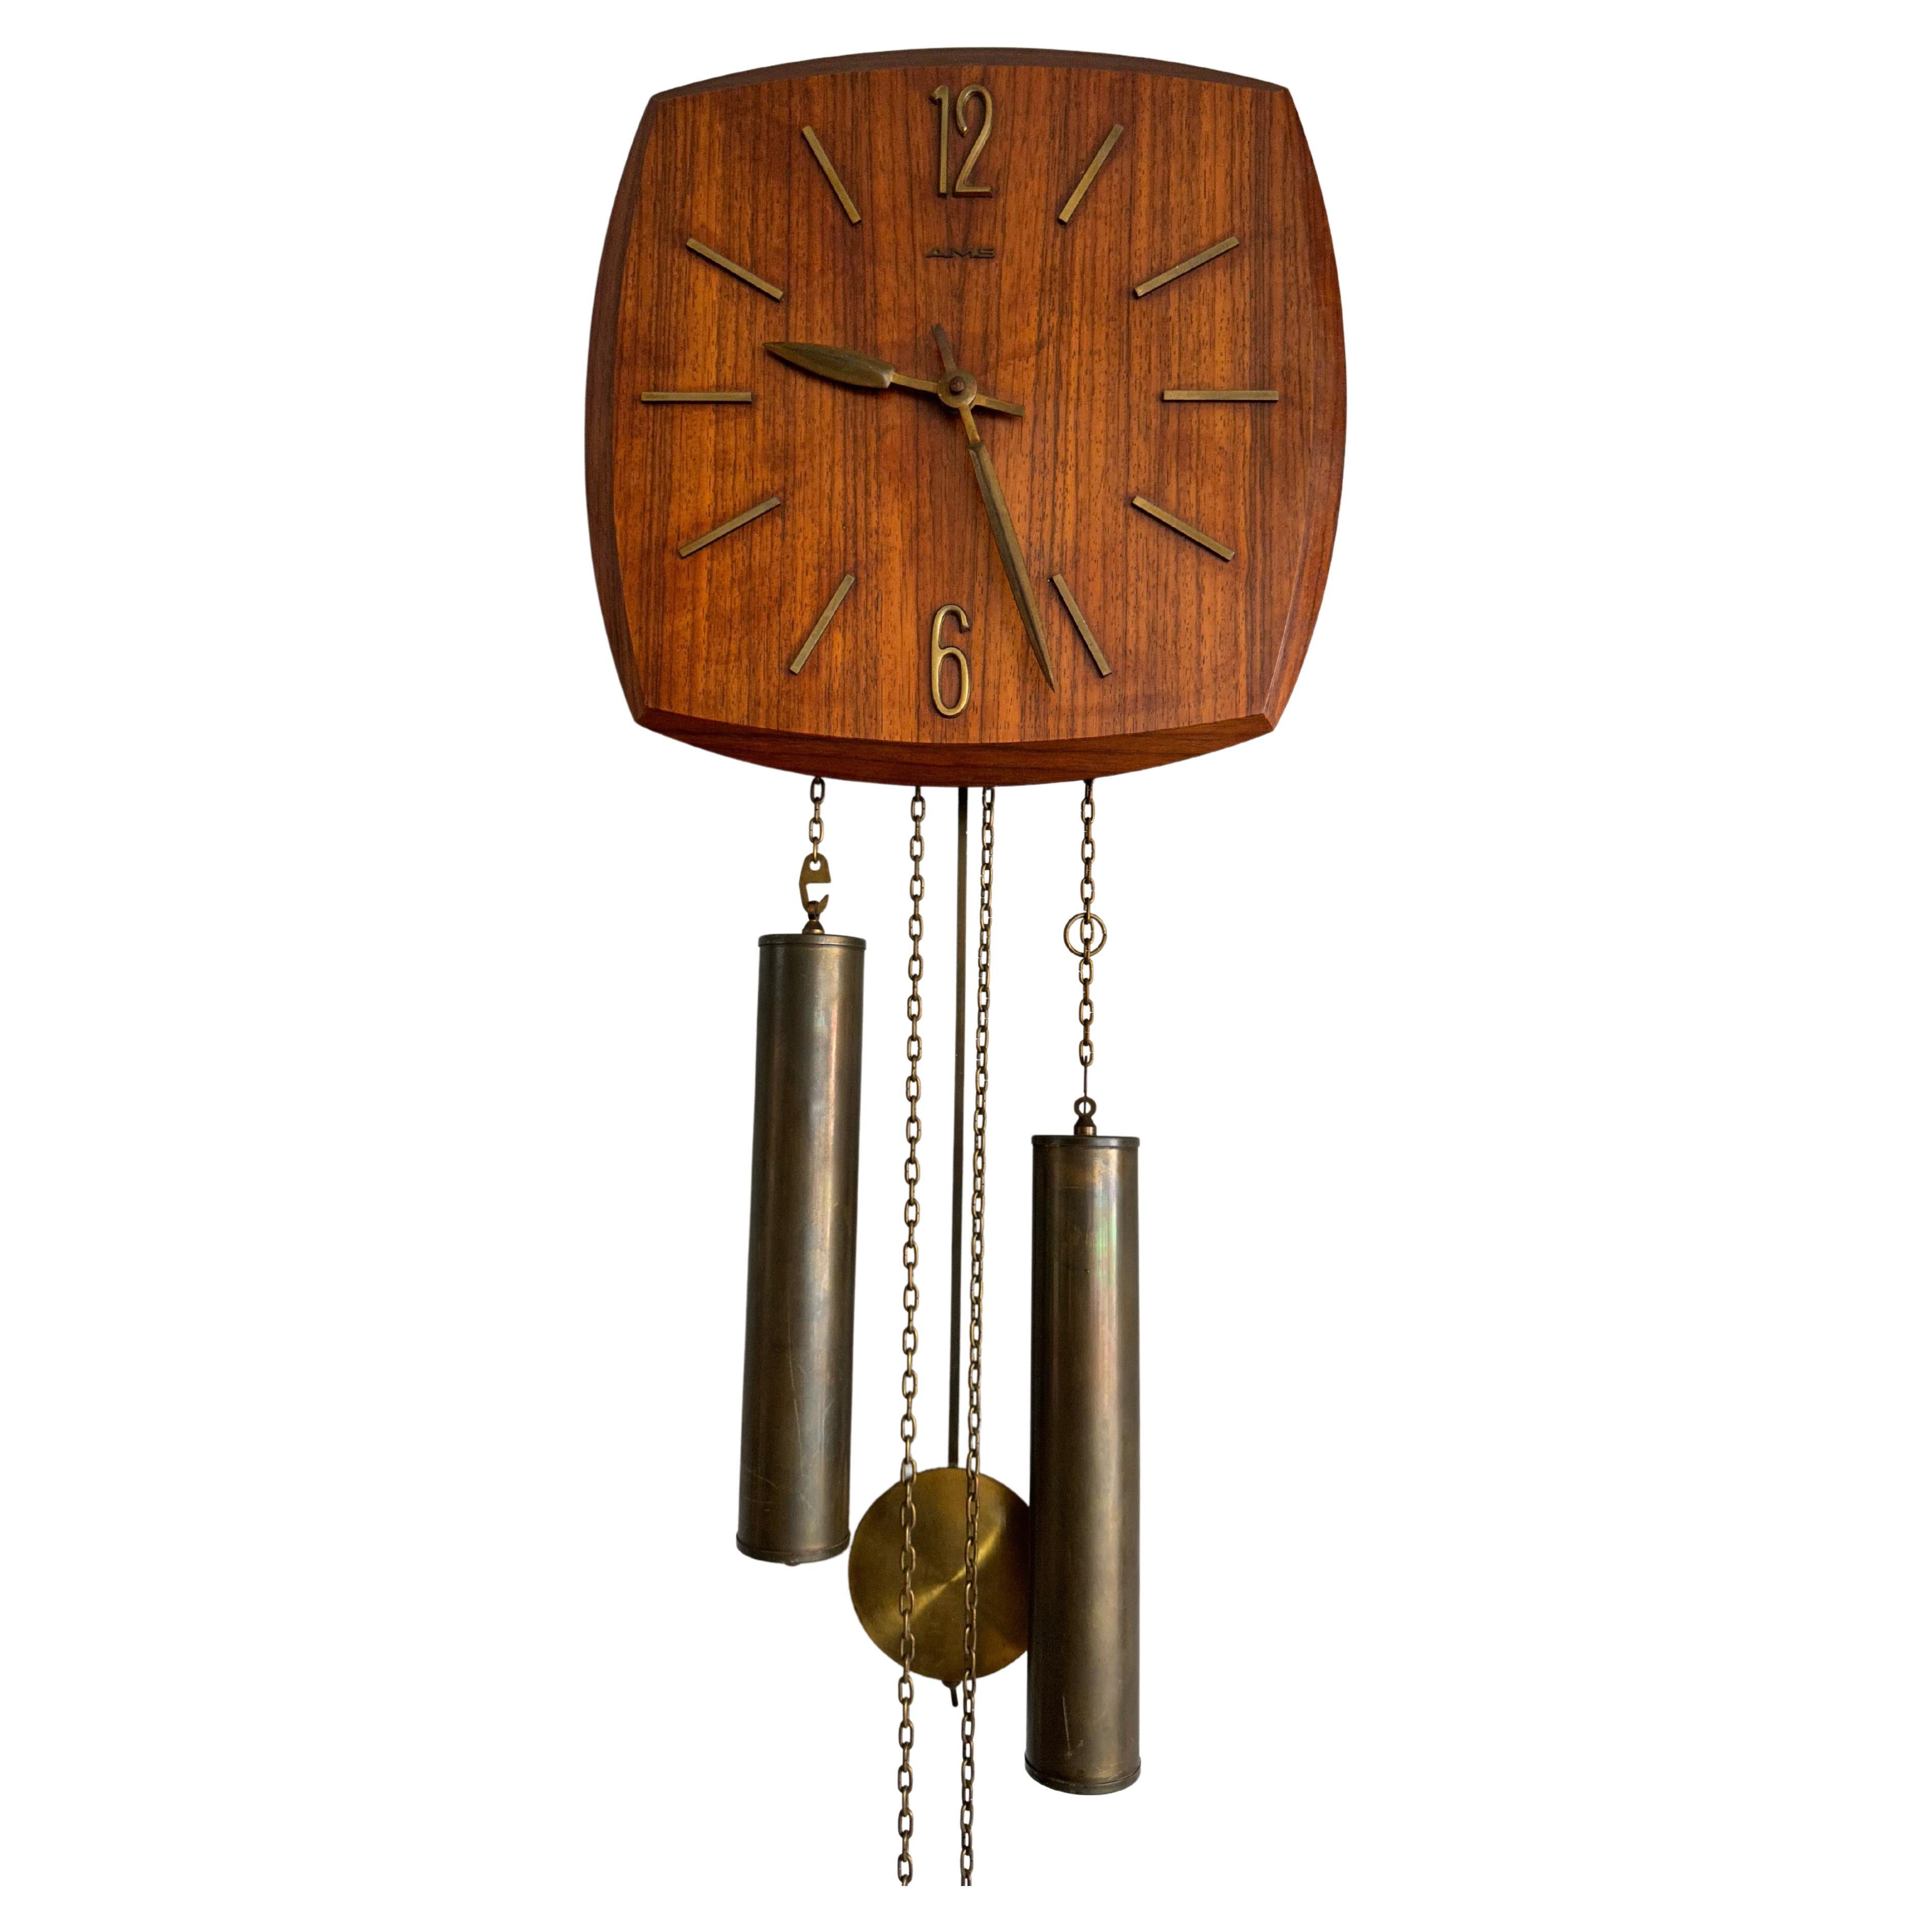 Stylish and top condition wall clock.

Over the years we have sold a few dozen wall clocks and they all had something special about them. For those who have been buying and/or collecting vintage wall clocks from the Mid-century style period in